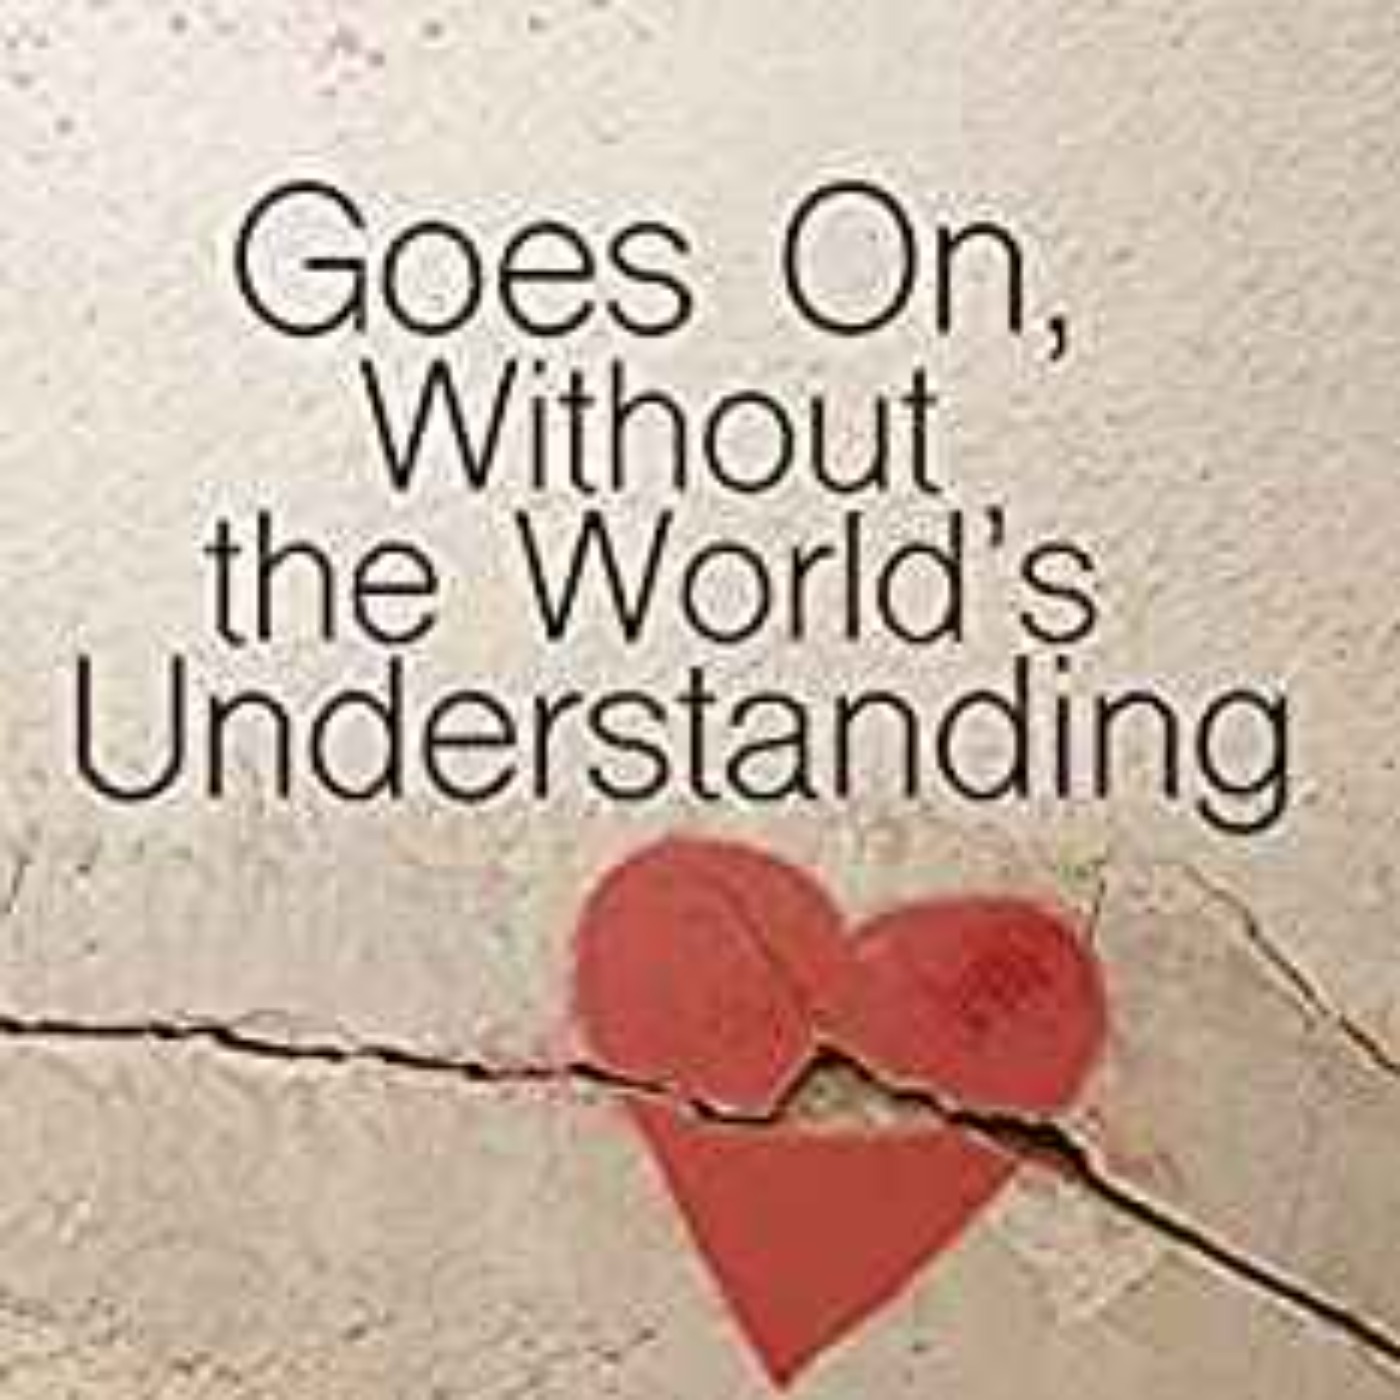 Thomas Westerfield - Goes On, Without the World’s Understanding